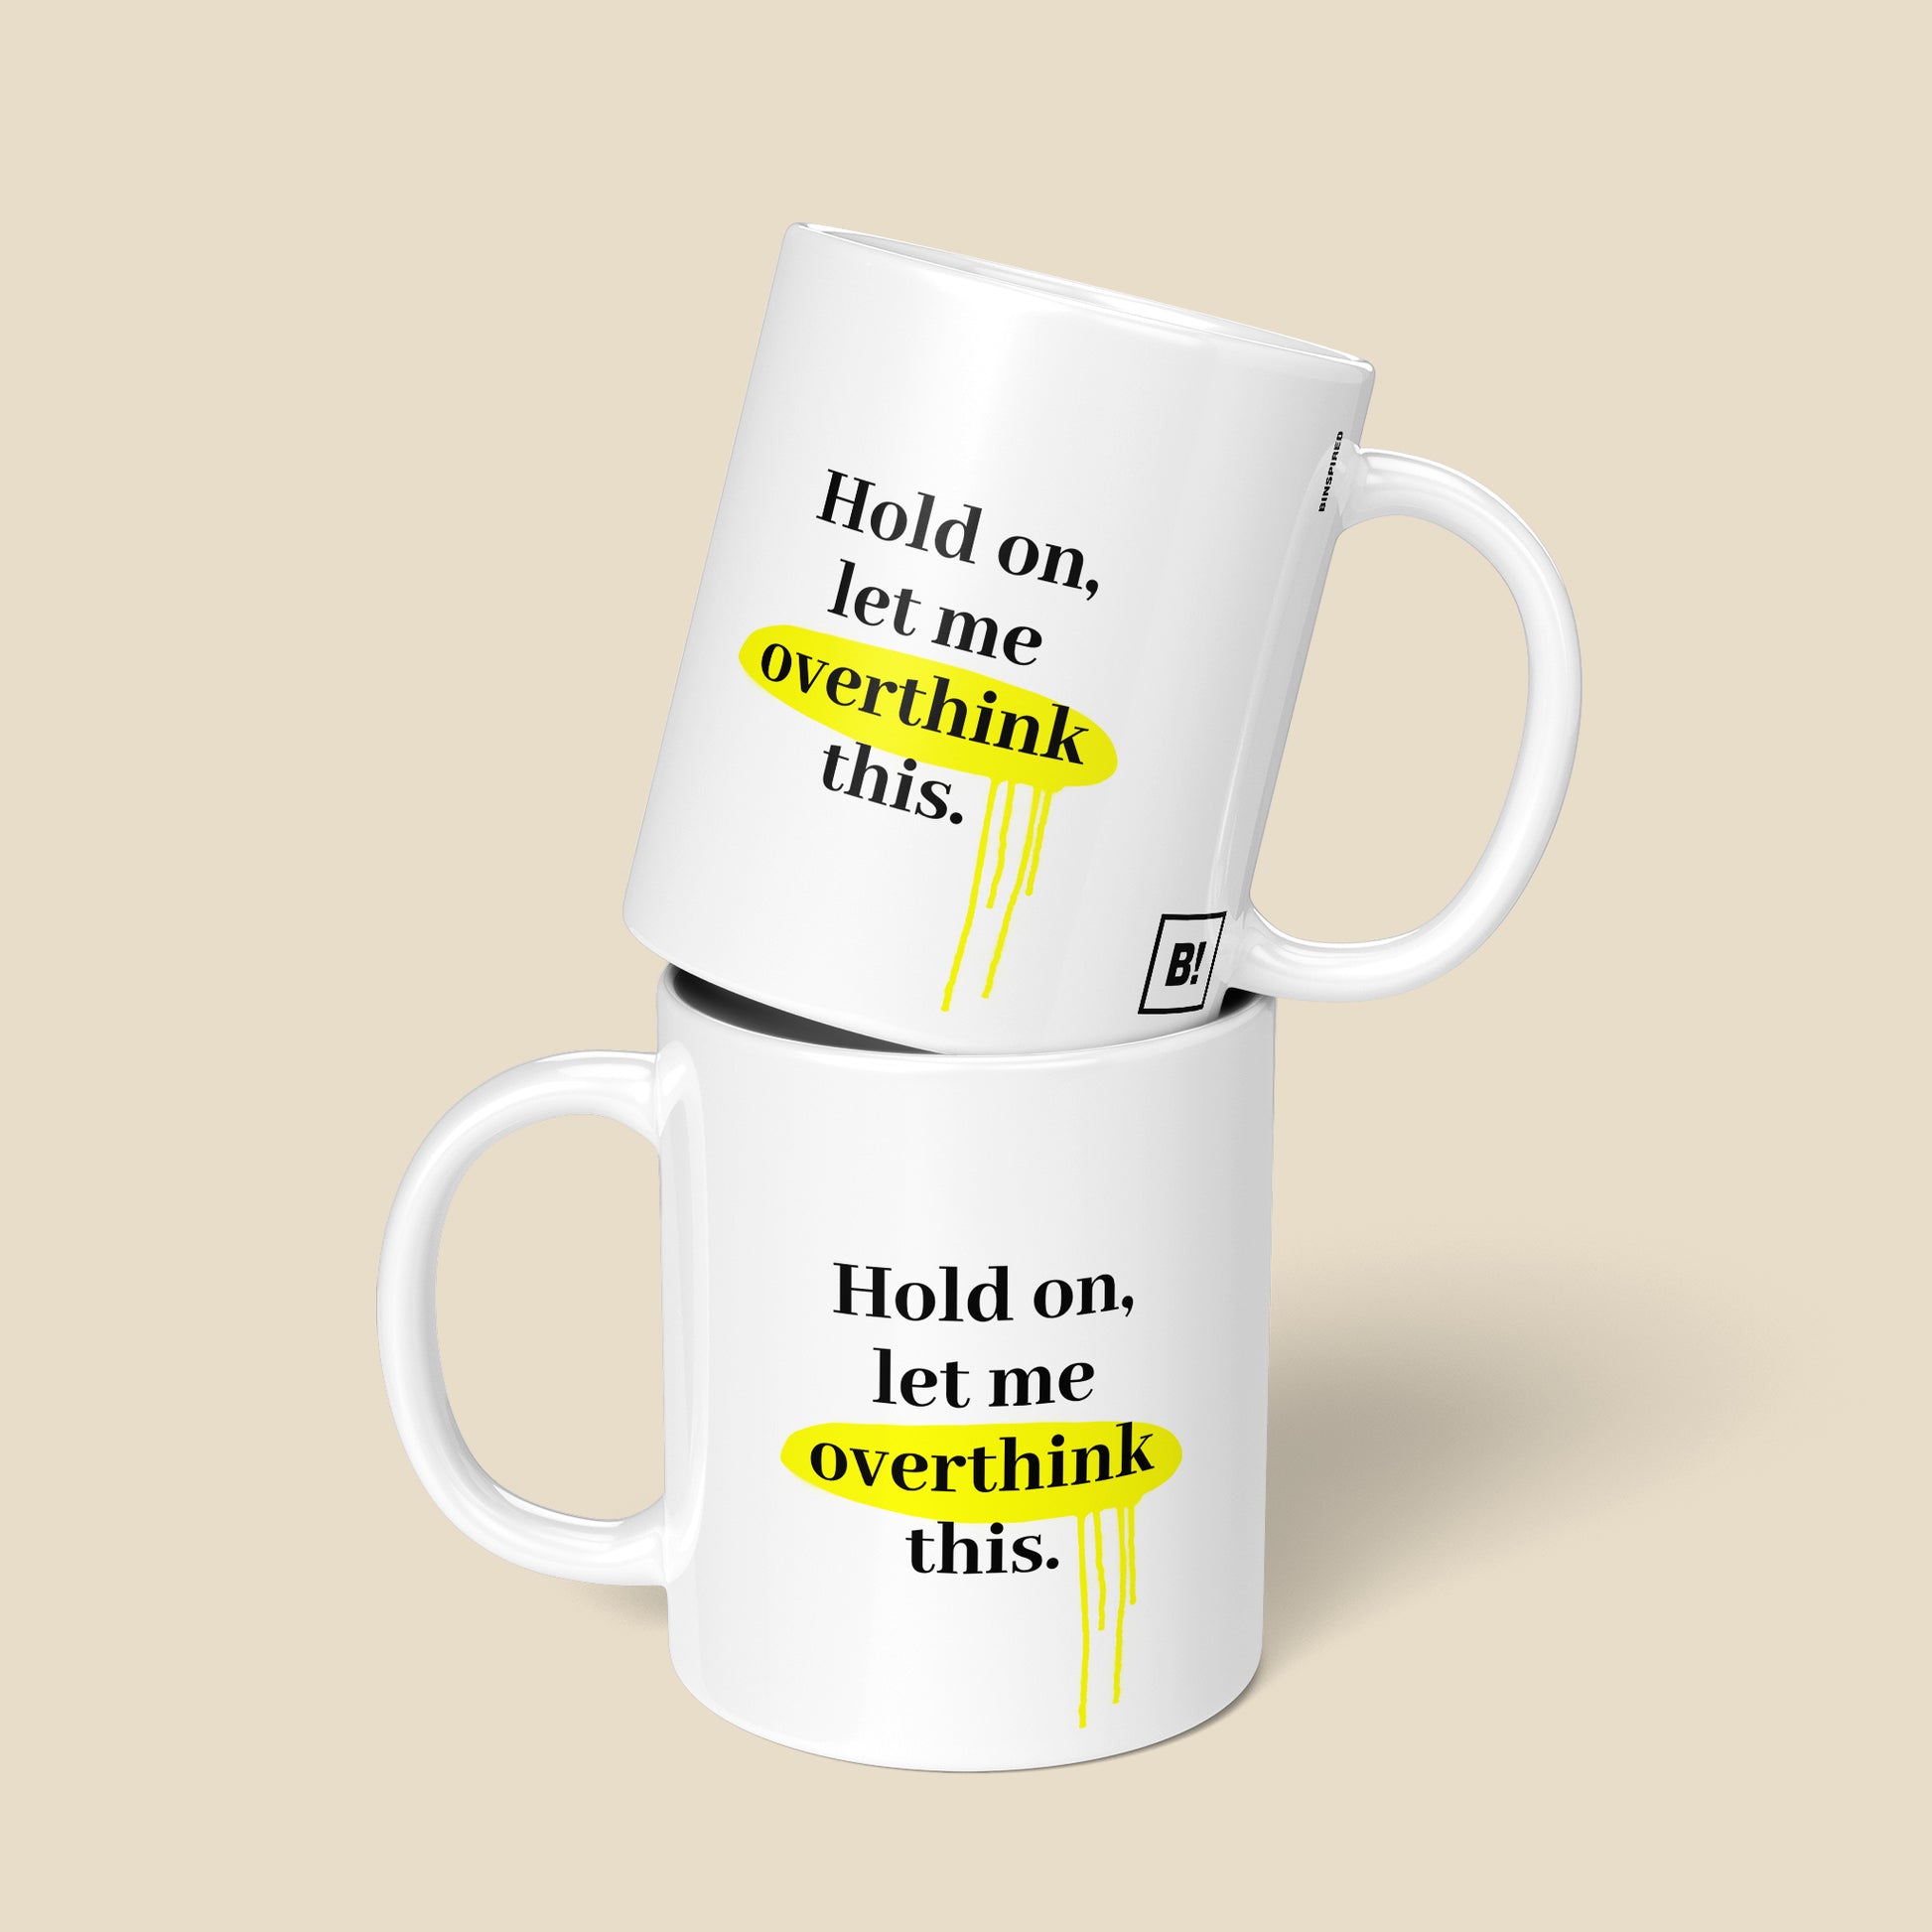 Get inspired by the quote, "Hold on, let me overthink this" on this 11oz white glossy coffee mug with a front and back view.